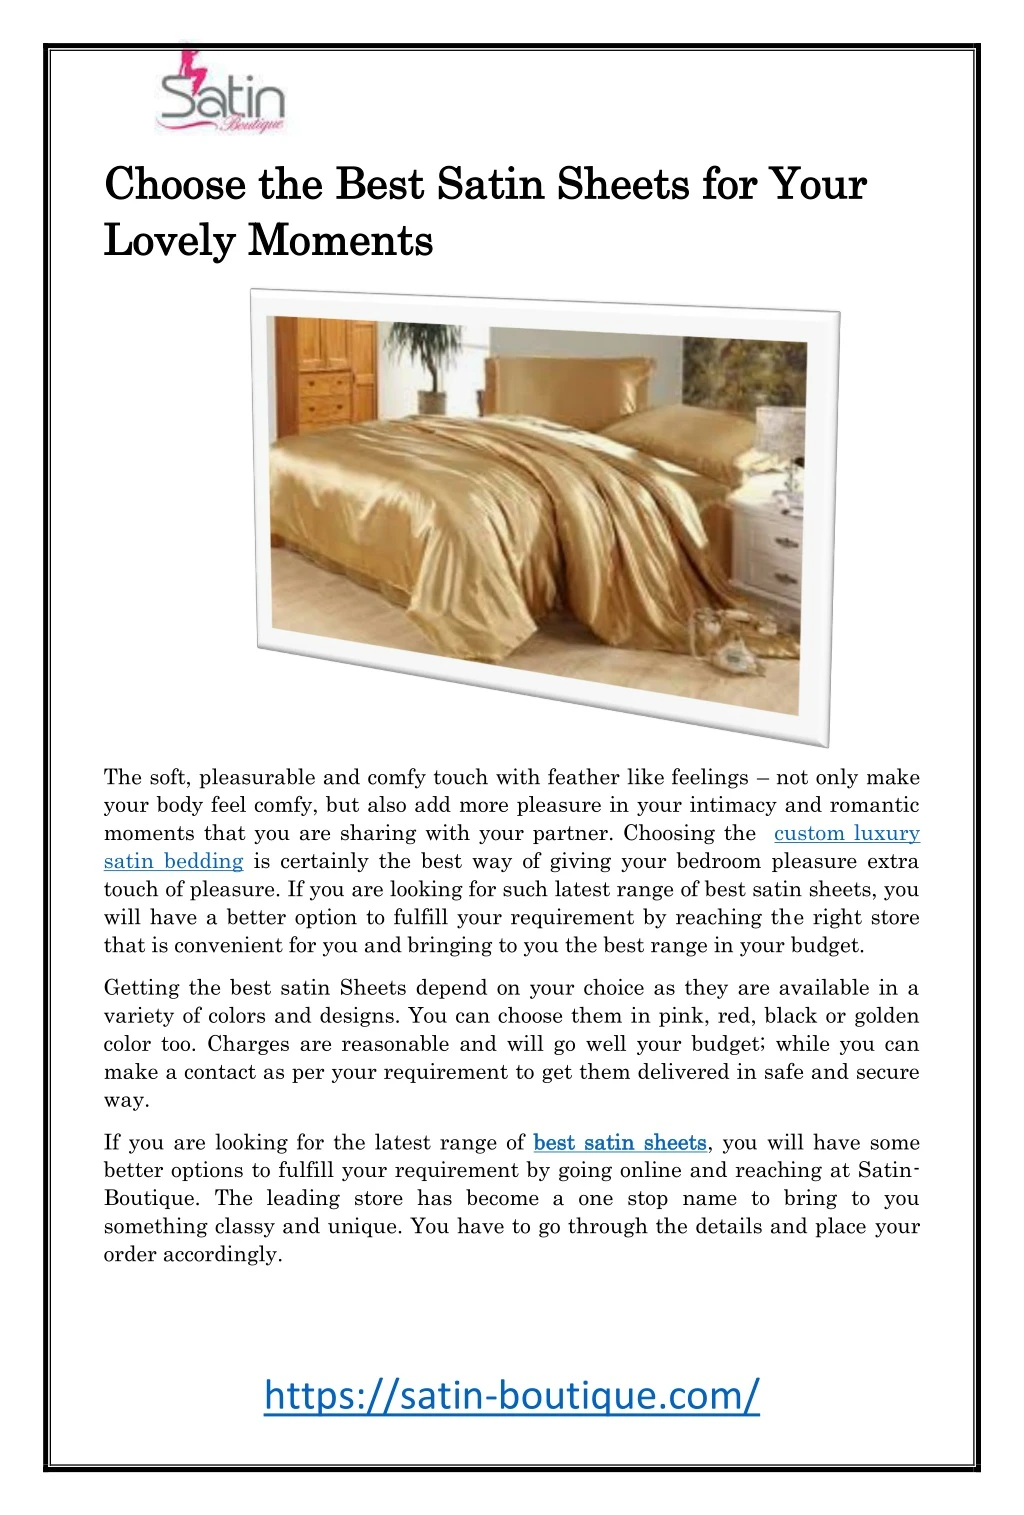 choose the best satin sheets for your choose n.